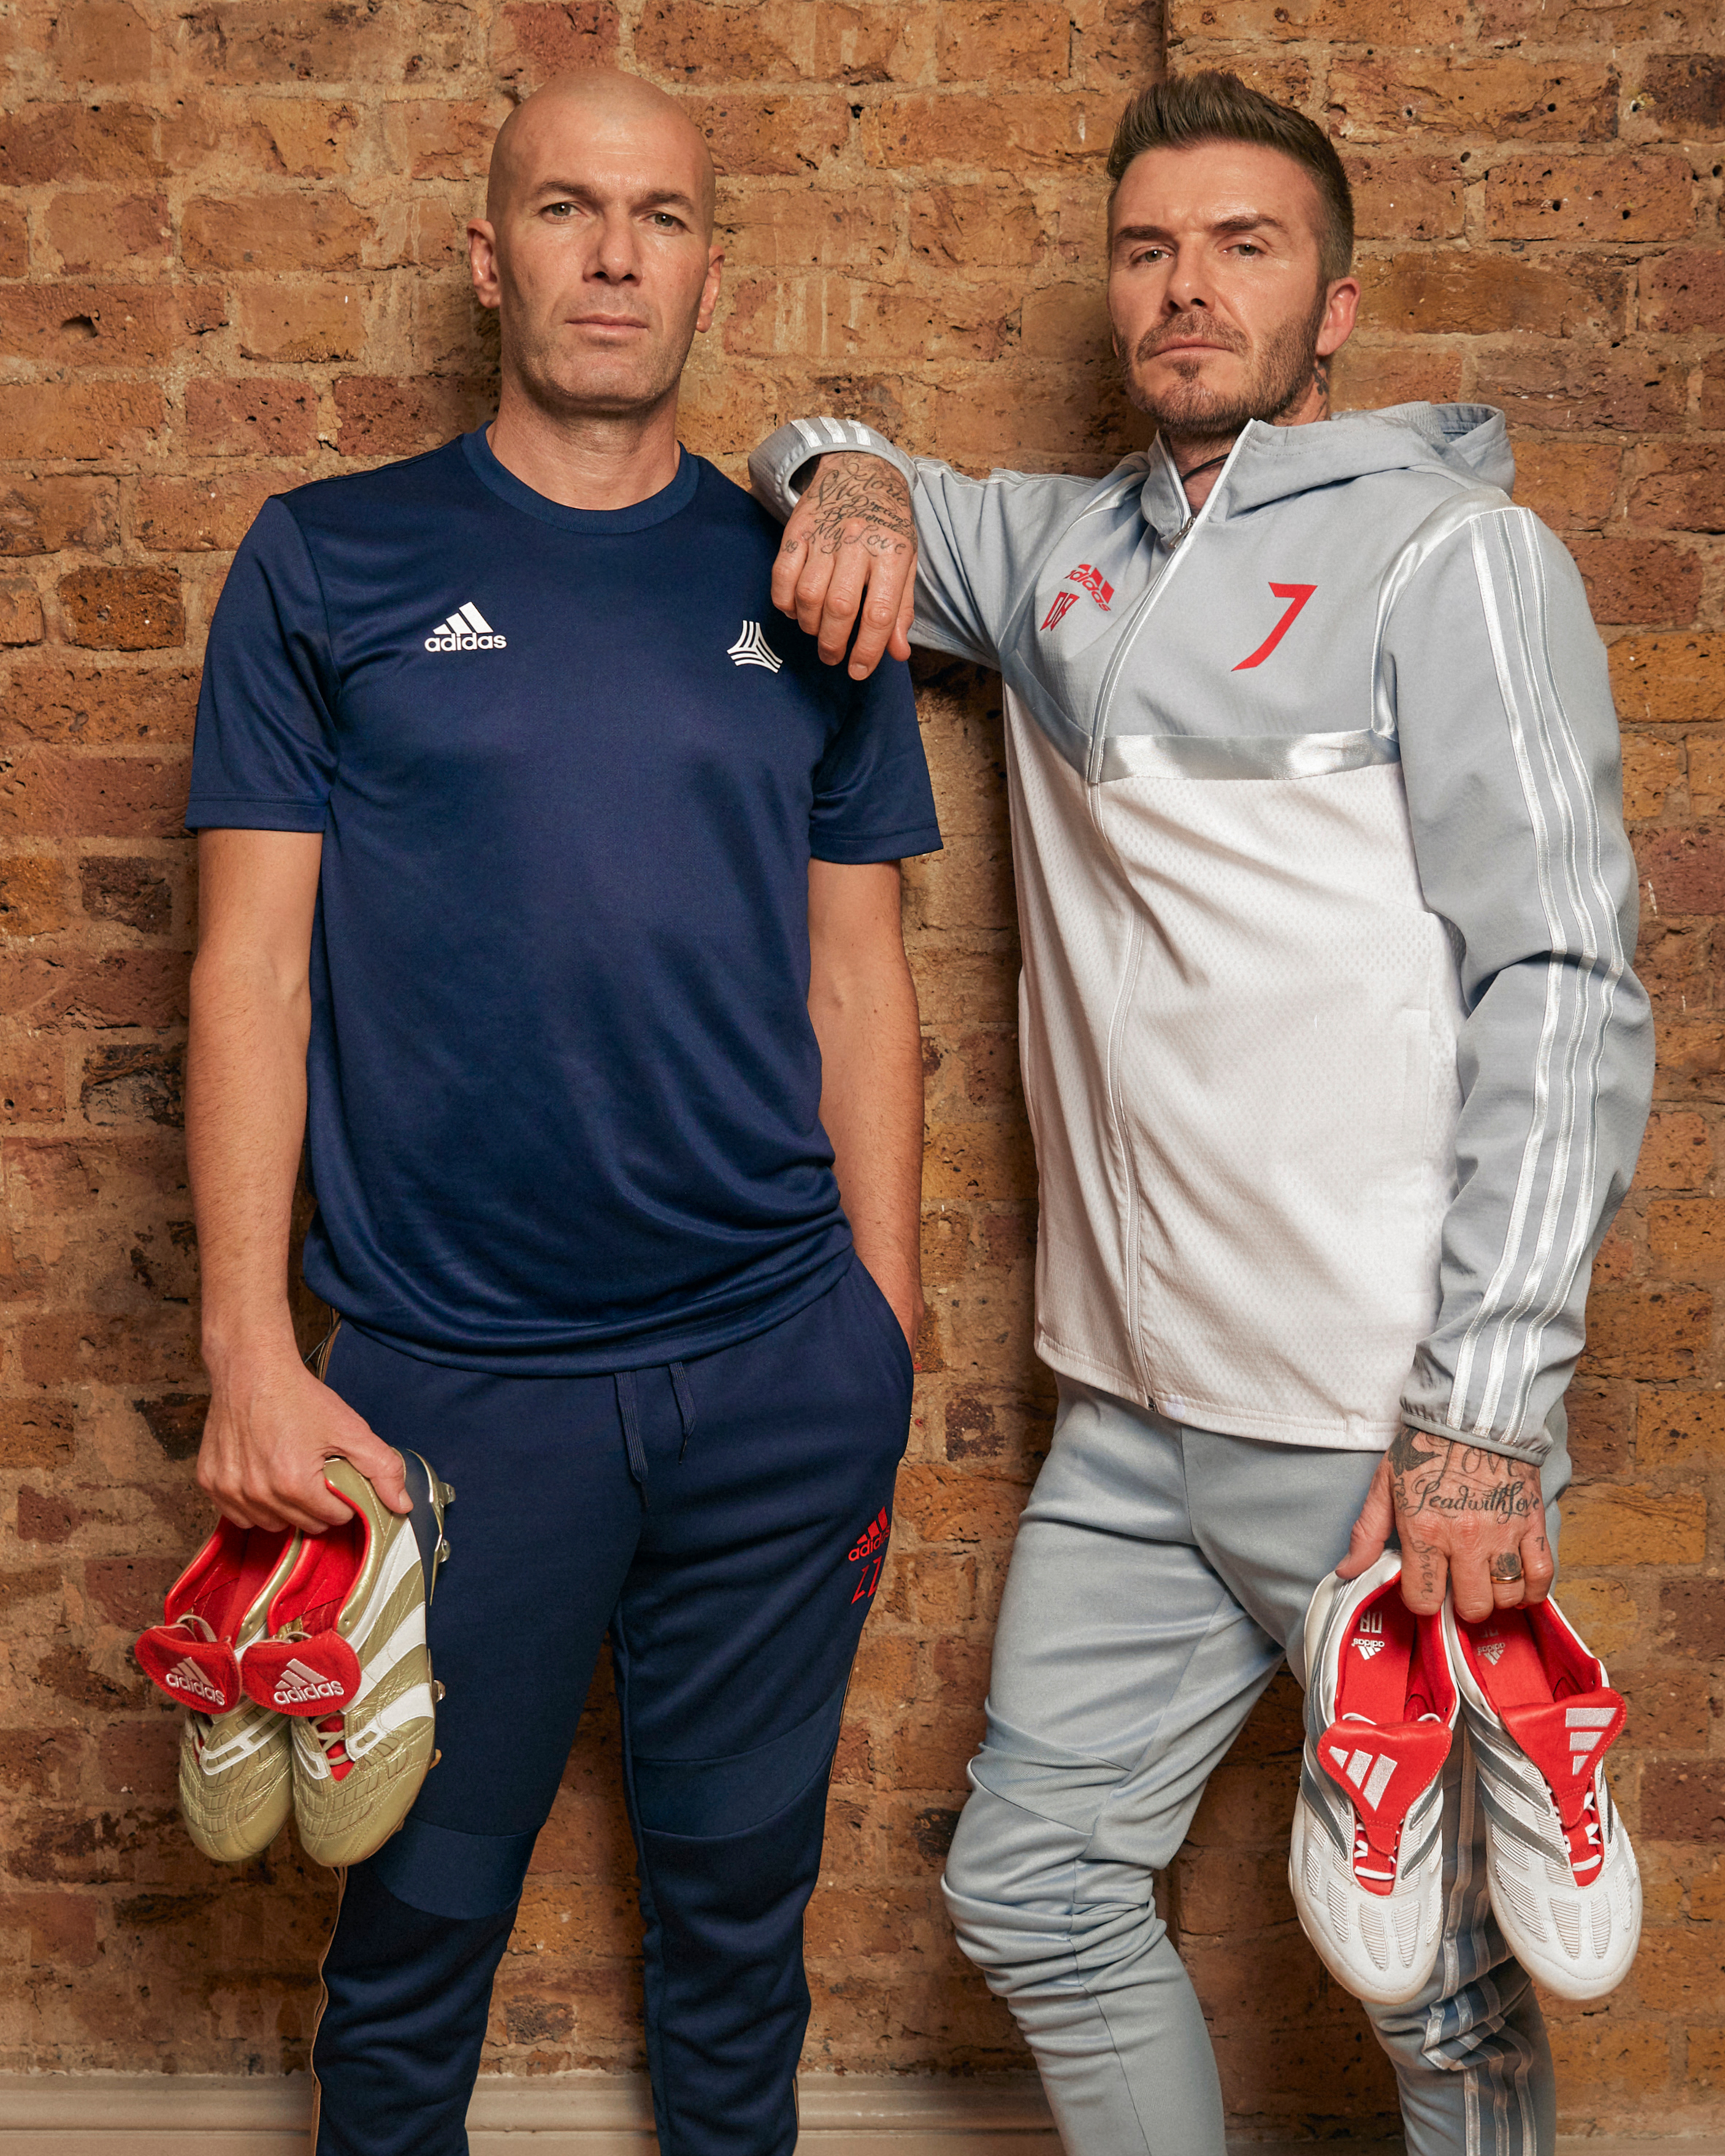  Beckham and Zidane have joined forces once again